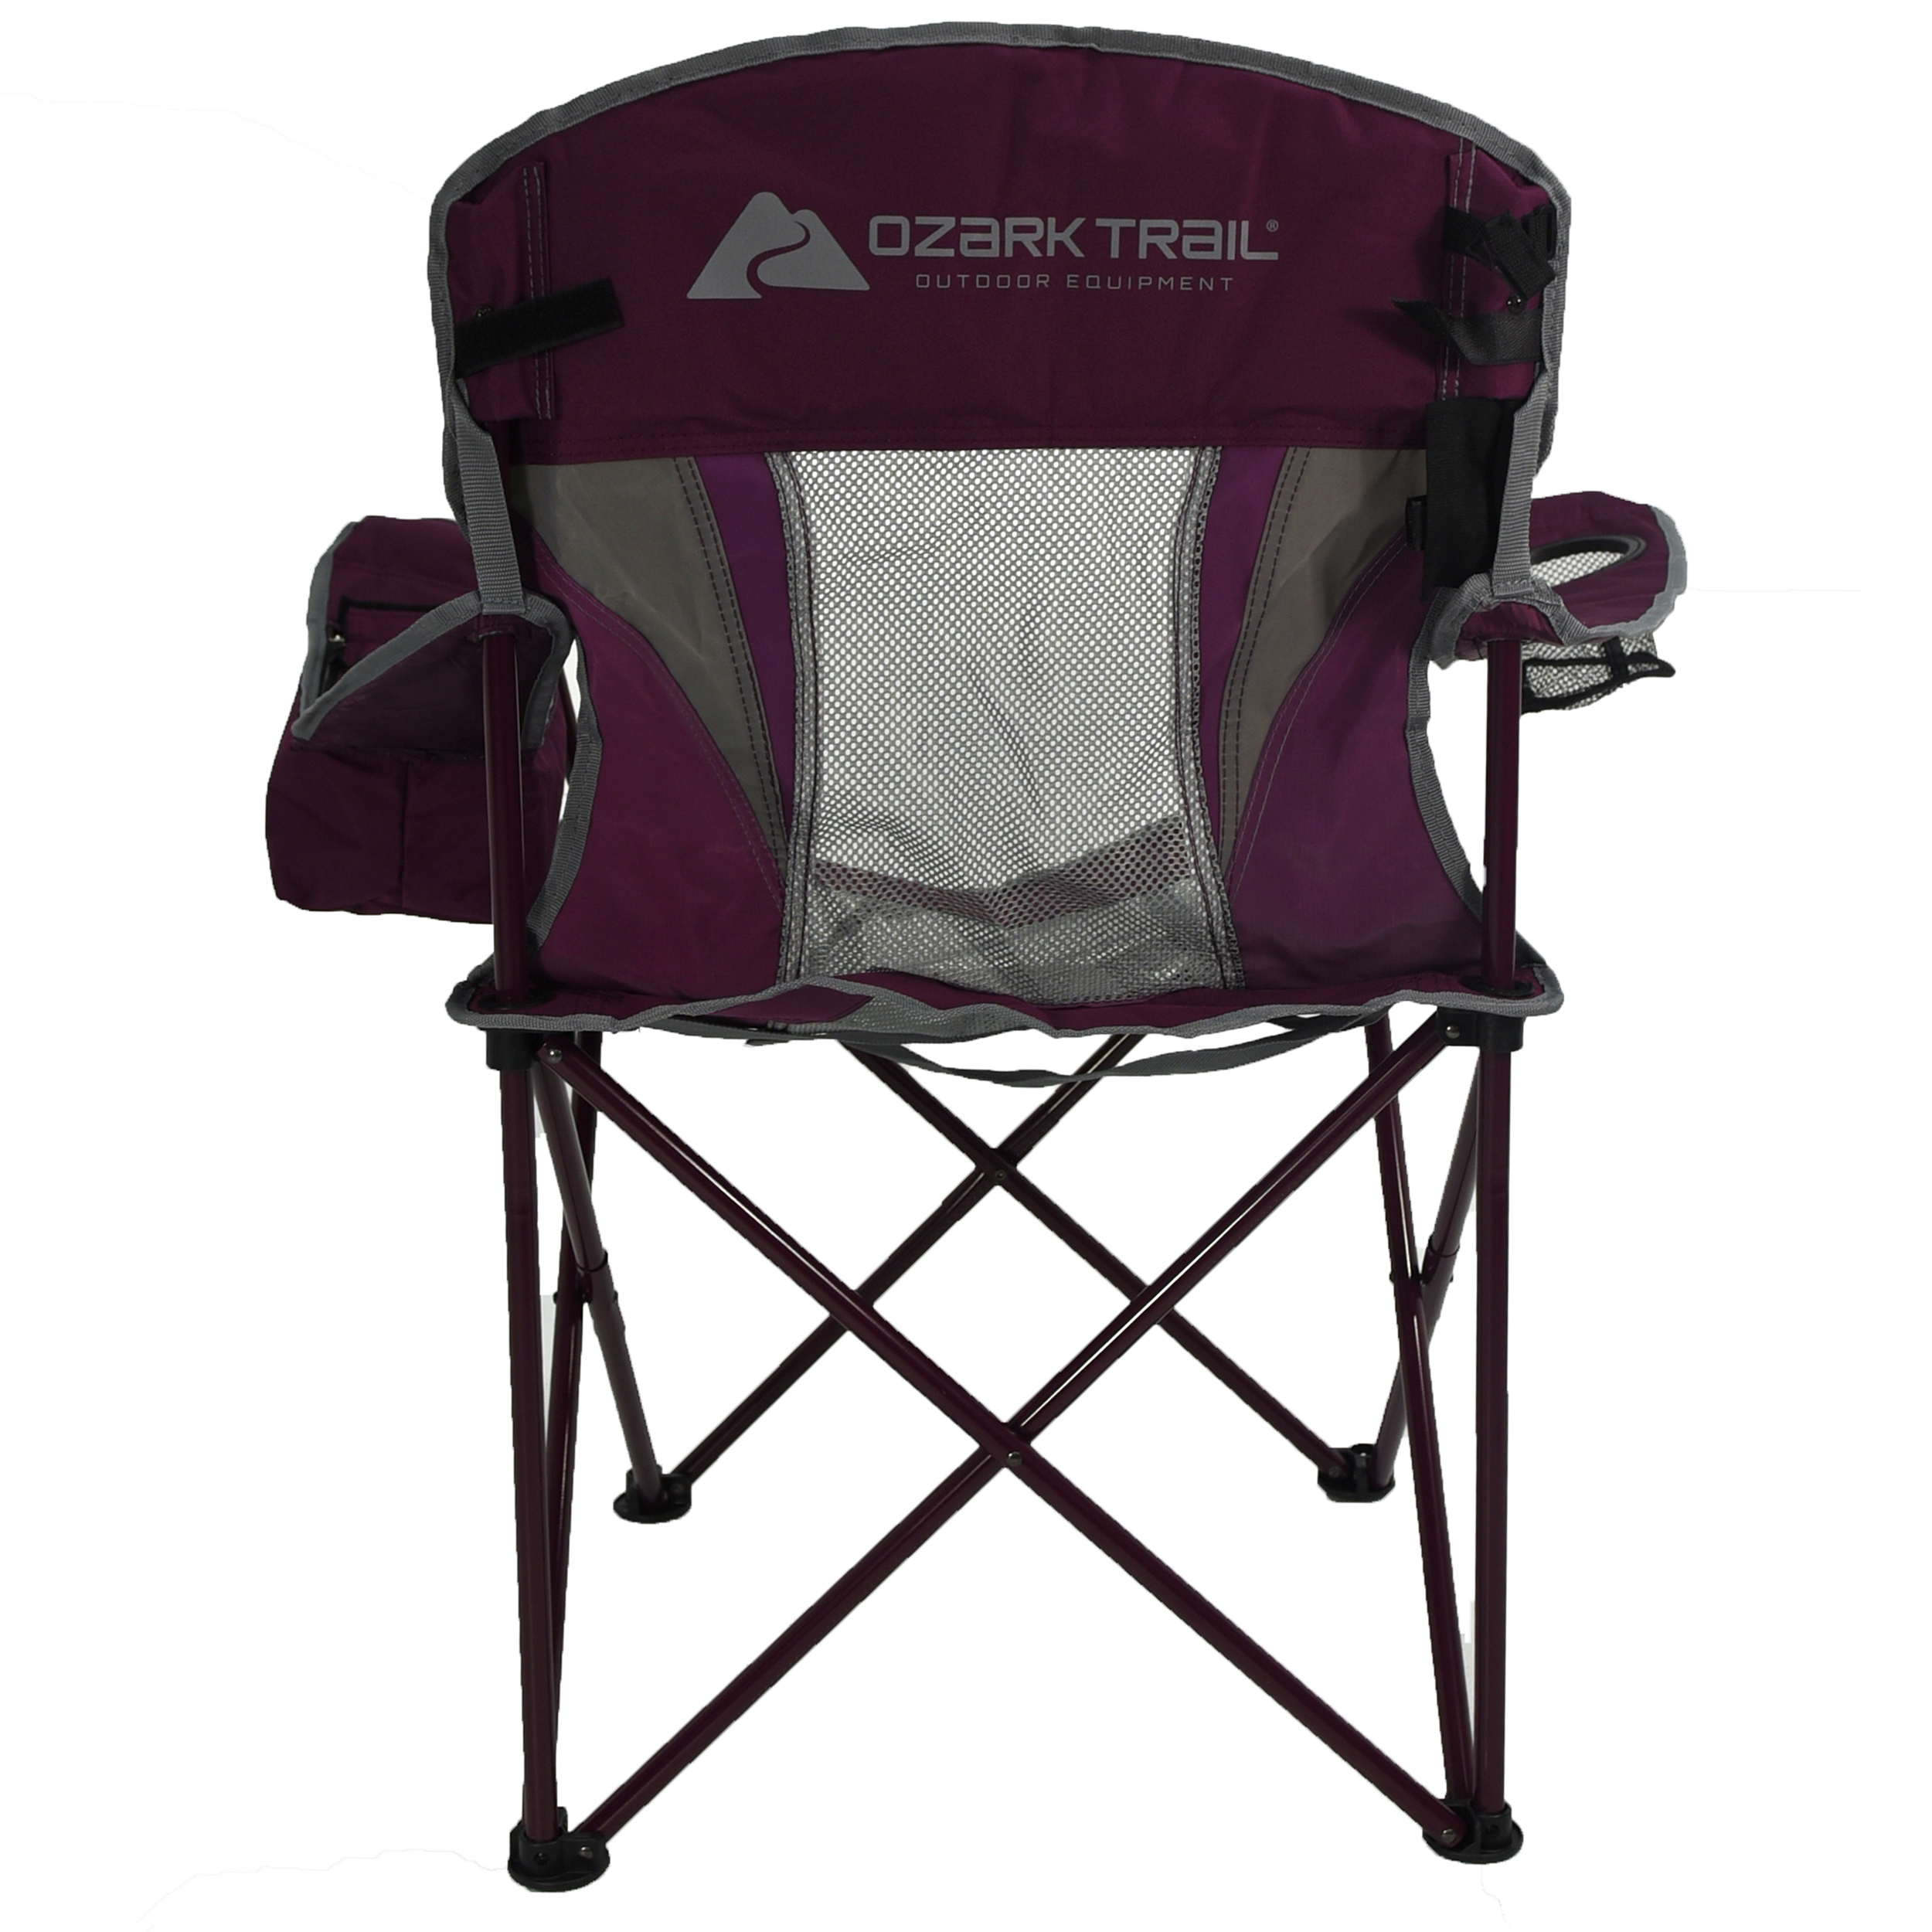 Ozark Trail Oversized Mesh Chair with Cooler, Purple, Adult - image 2 of 9